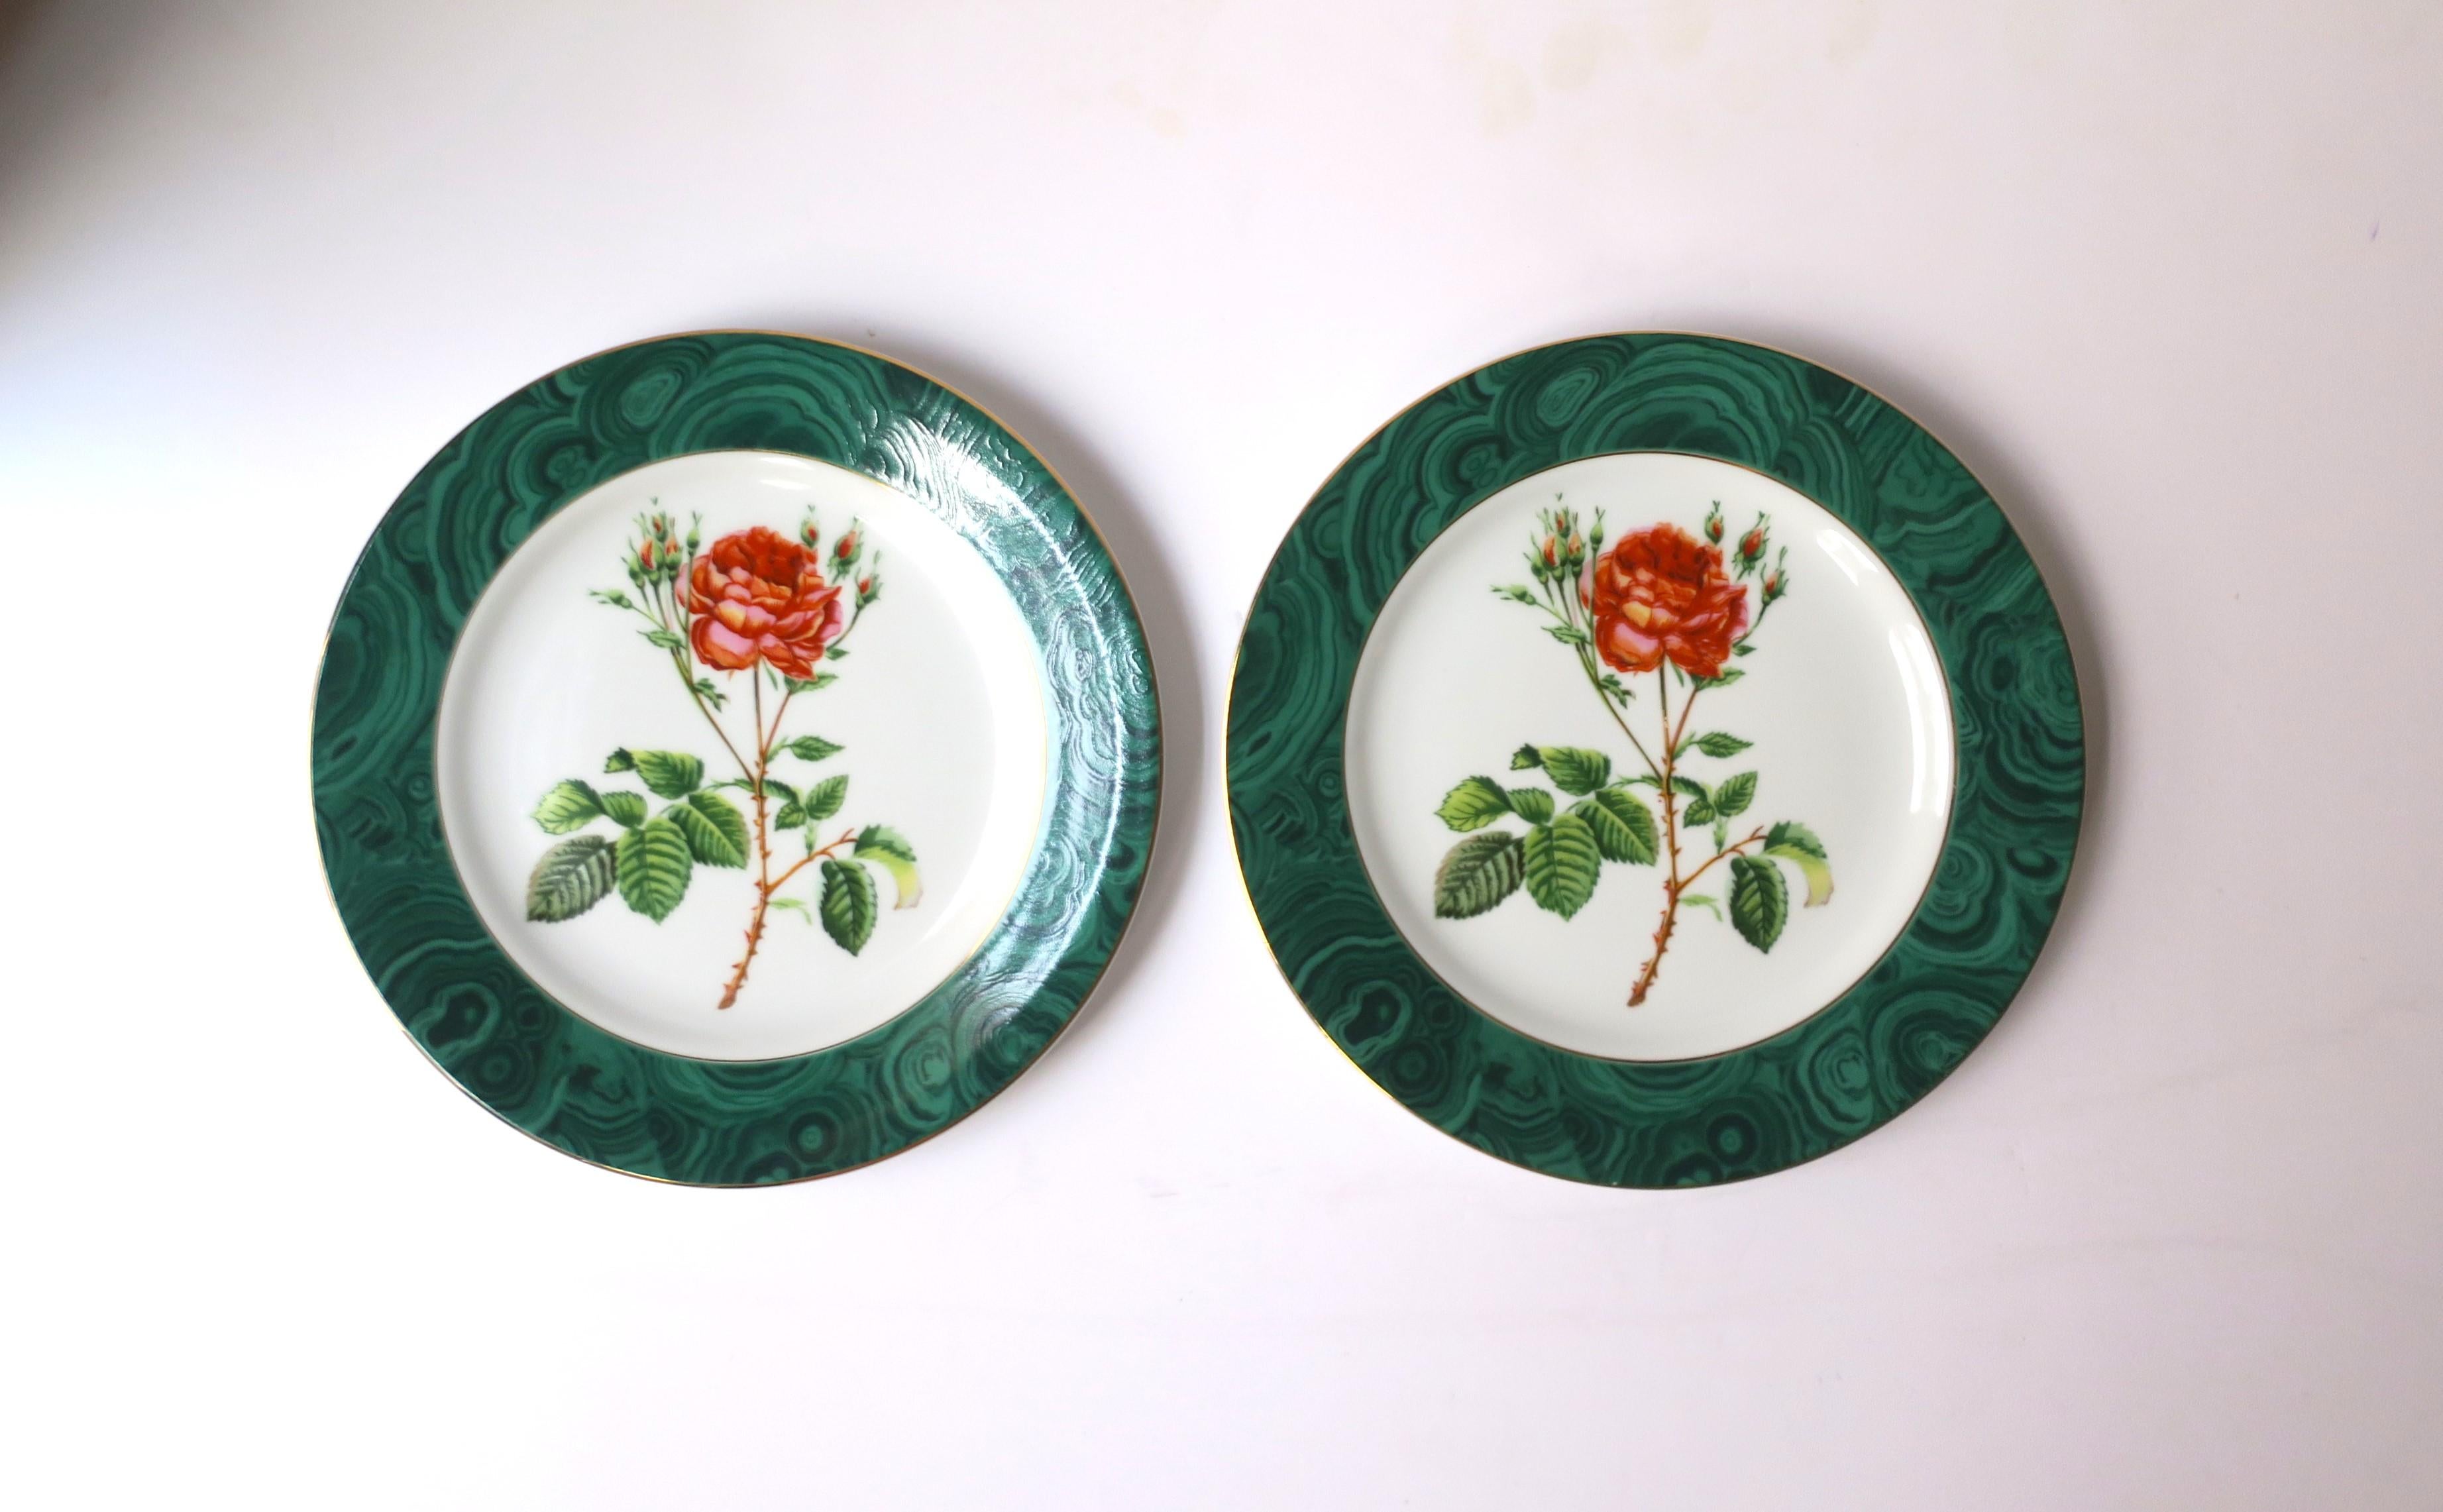 A beautiful pair of porcelain plates with green malachite style edge and chintz rose flower center by designer Georges Briard, circa late-20th century. A great set to use every day or for special occasions/entertaining to hold small items like